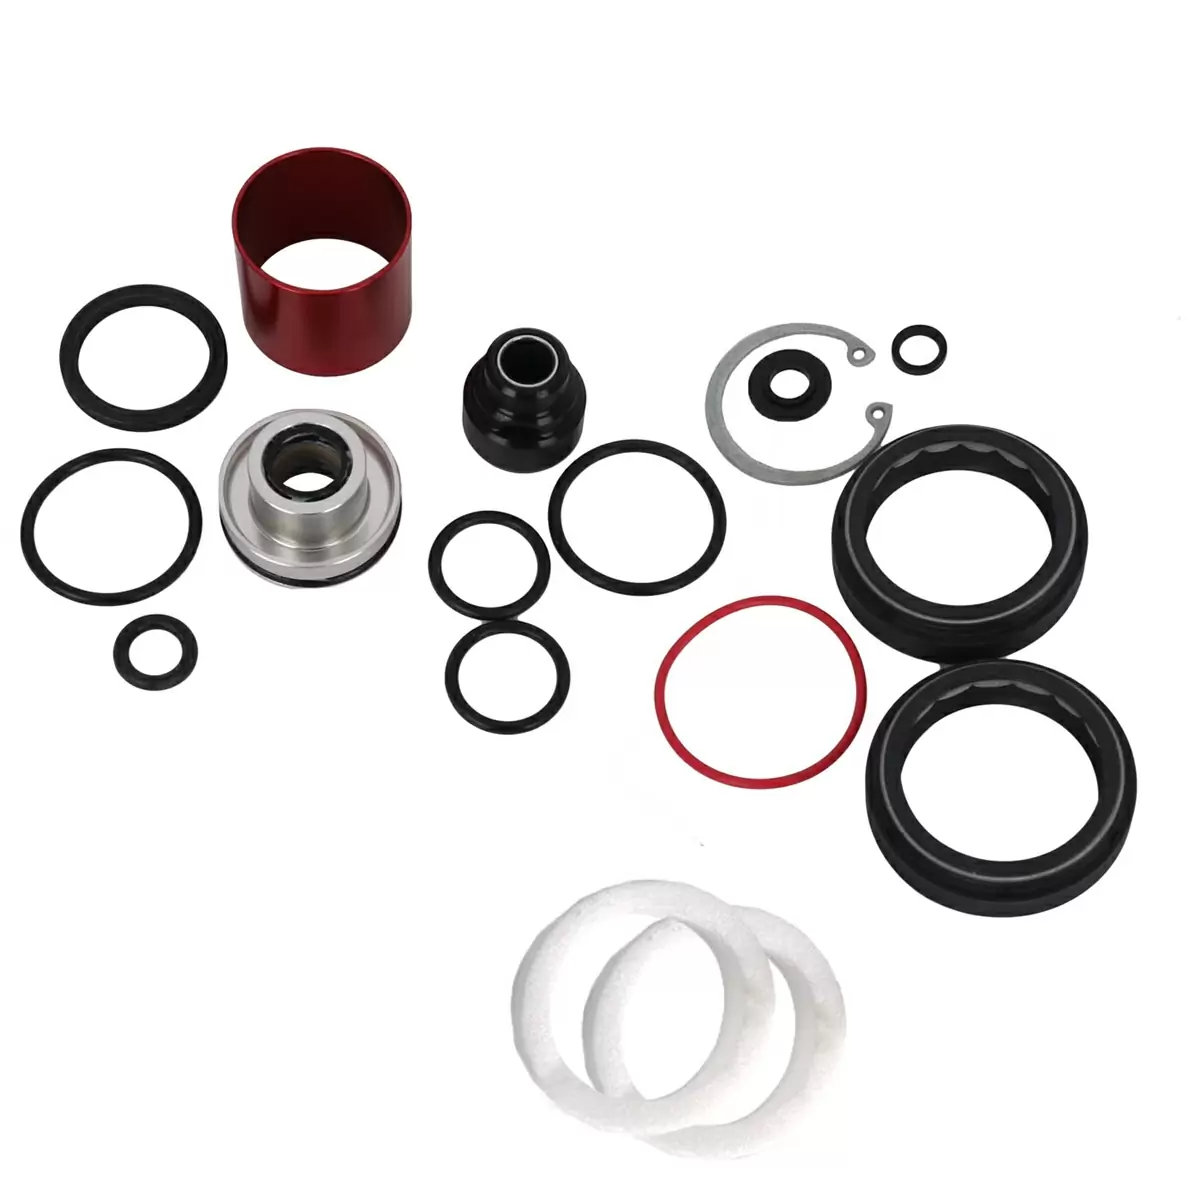 Service kit 200 hours / 1 year for ZEB SELECT+ / ULTIMATE A1 Dual Position Air (2021) - image